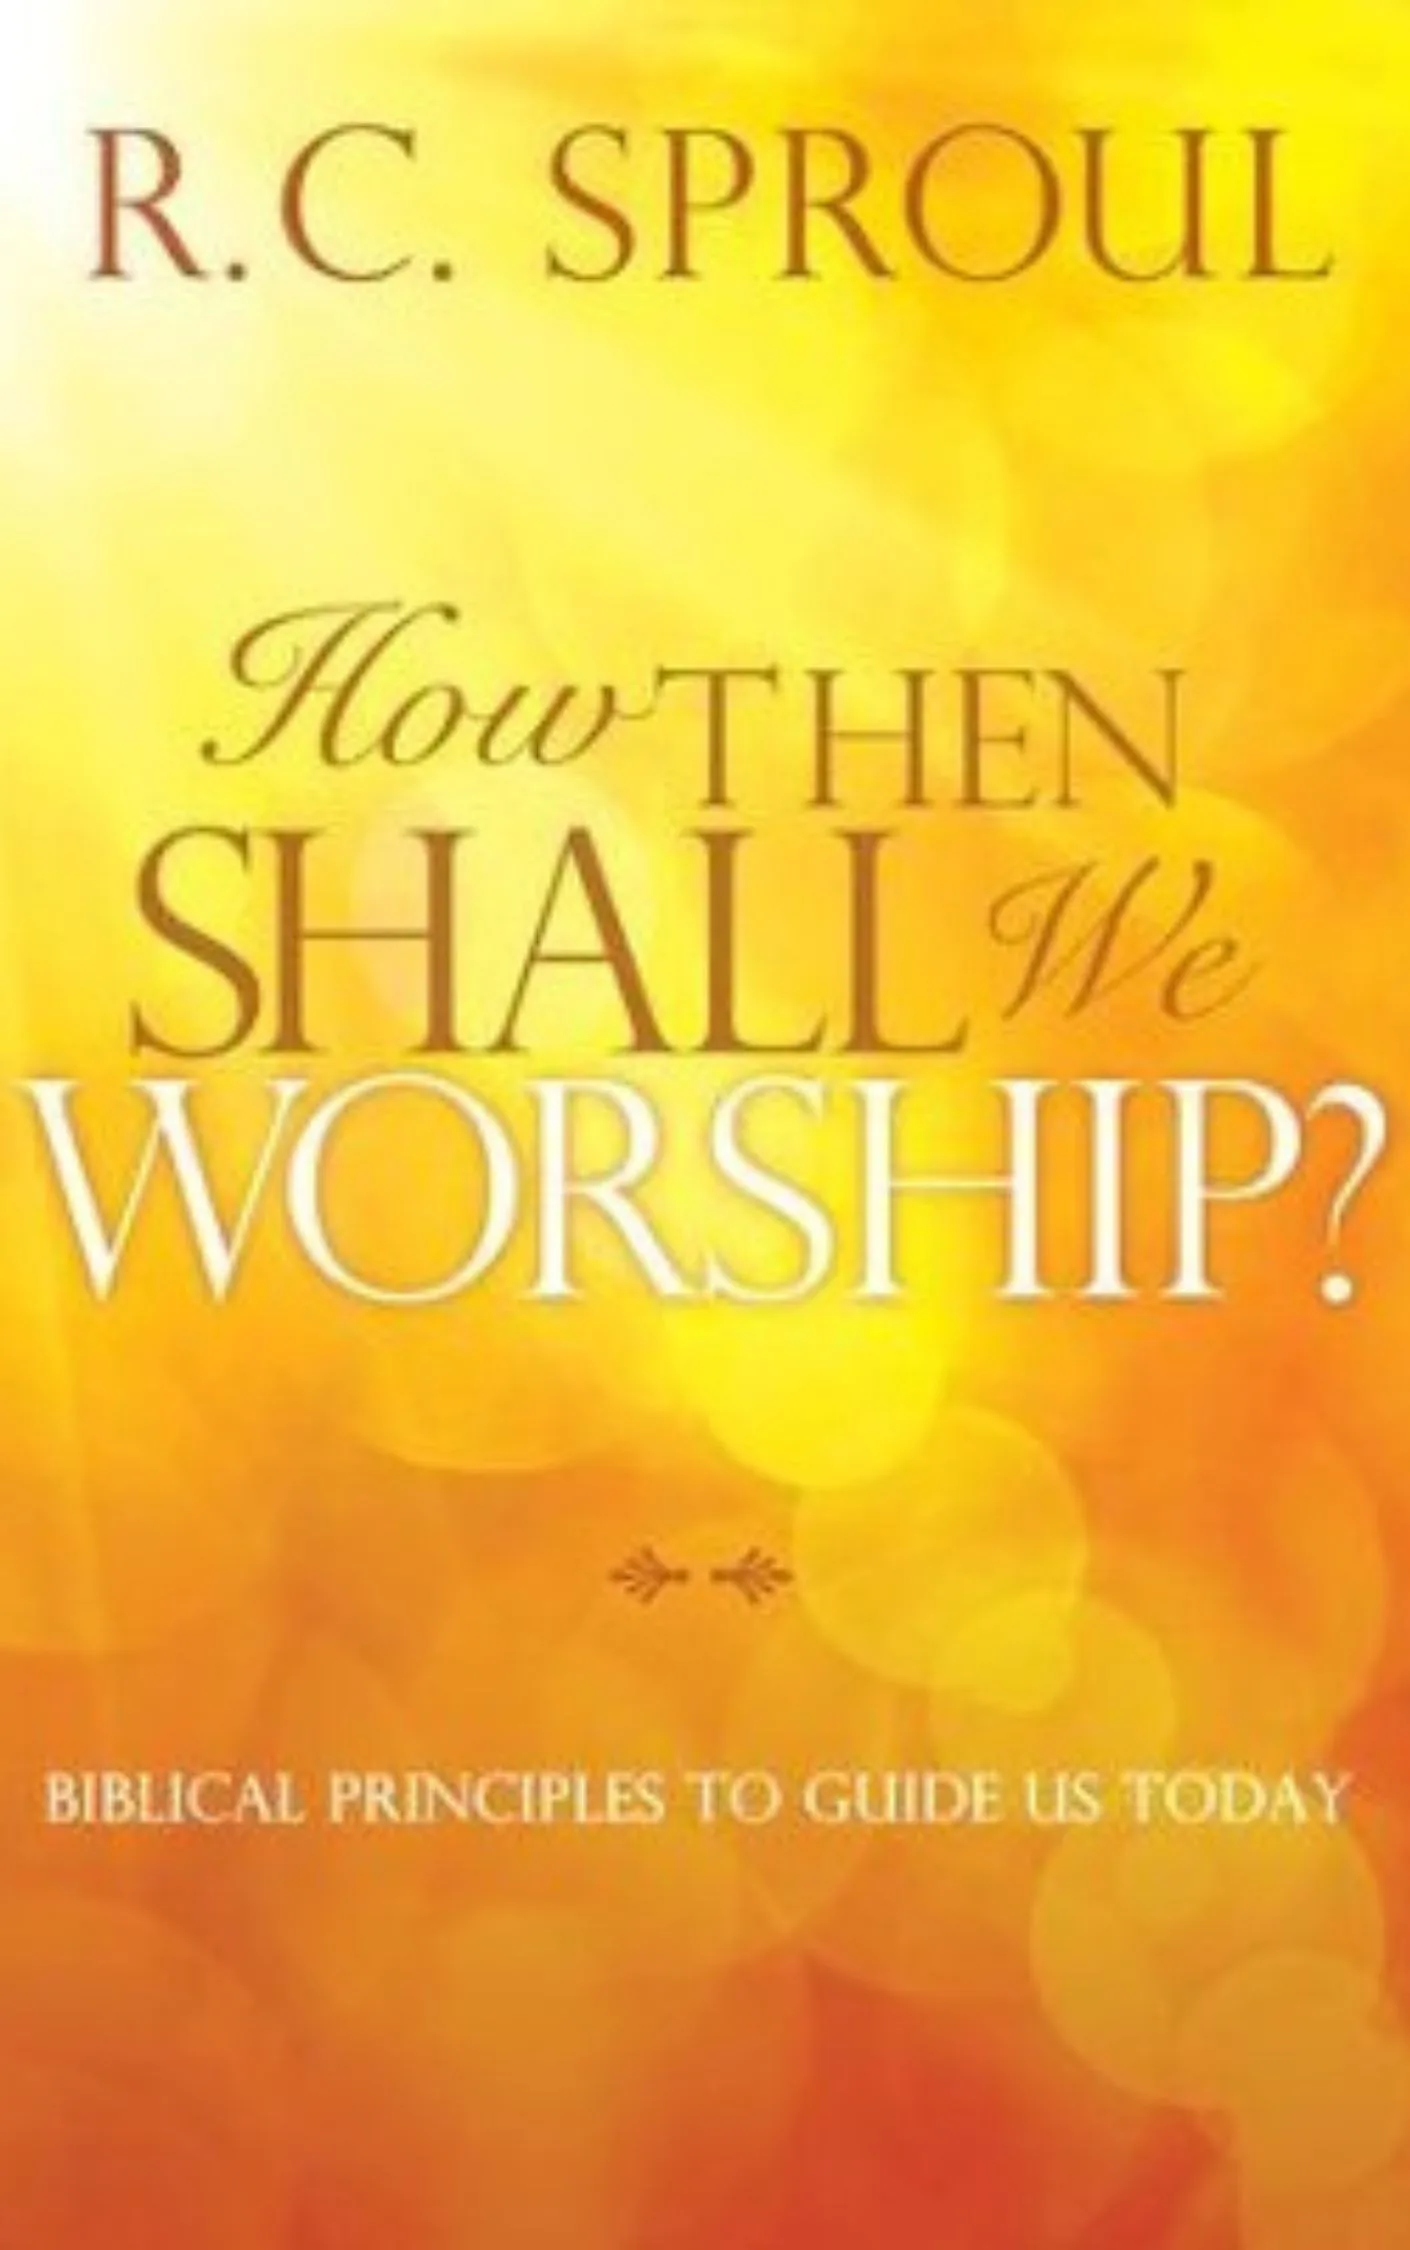 How Then Shall We Worship? by R.C. Sproul